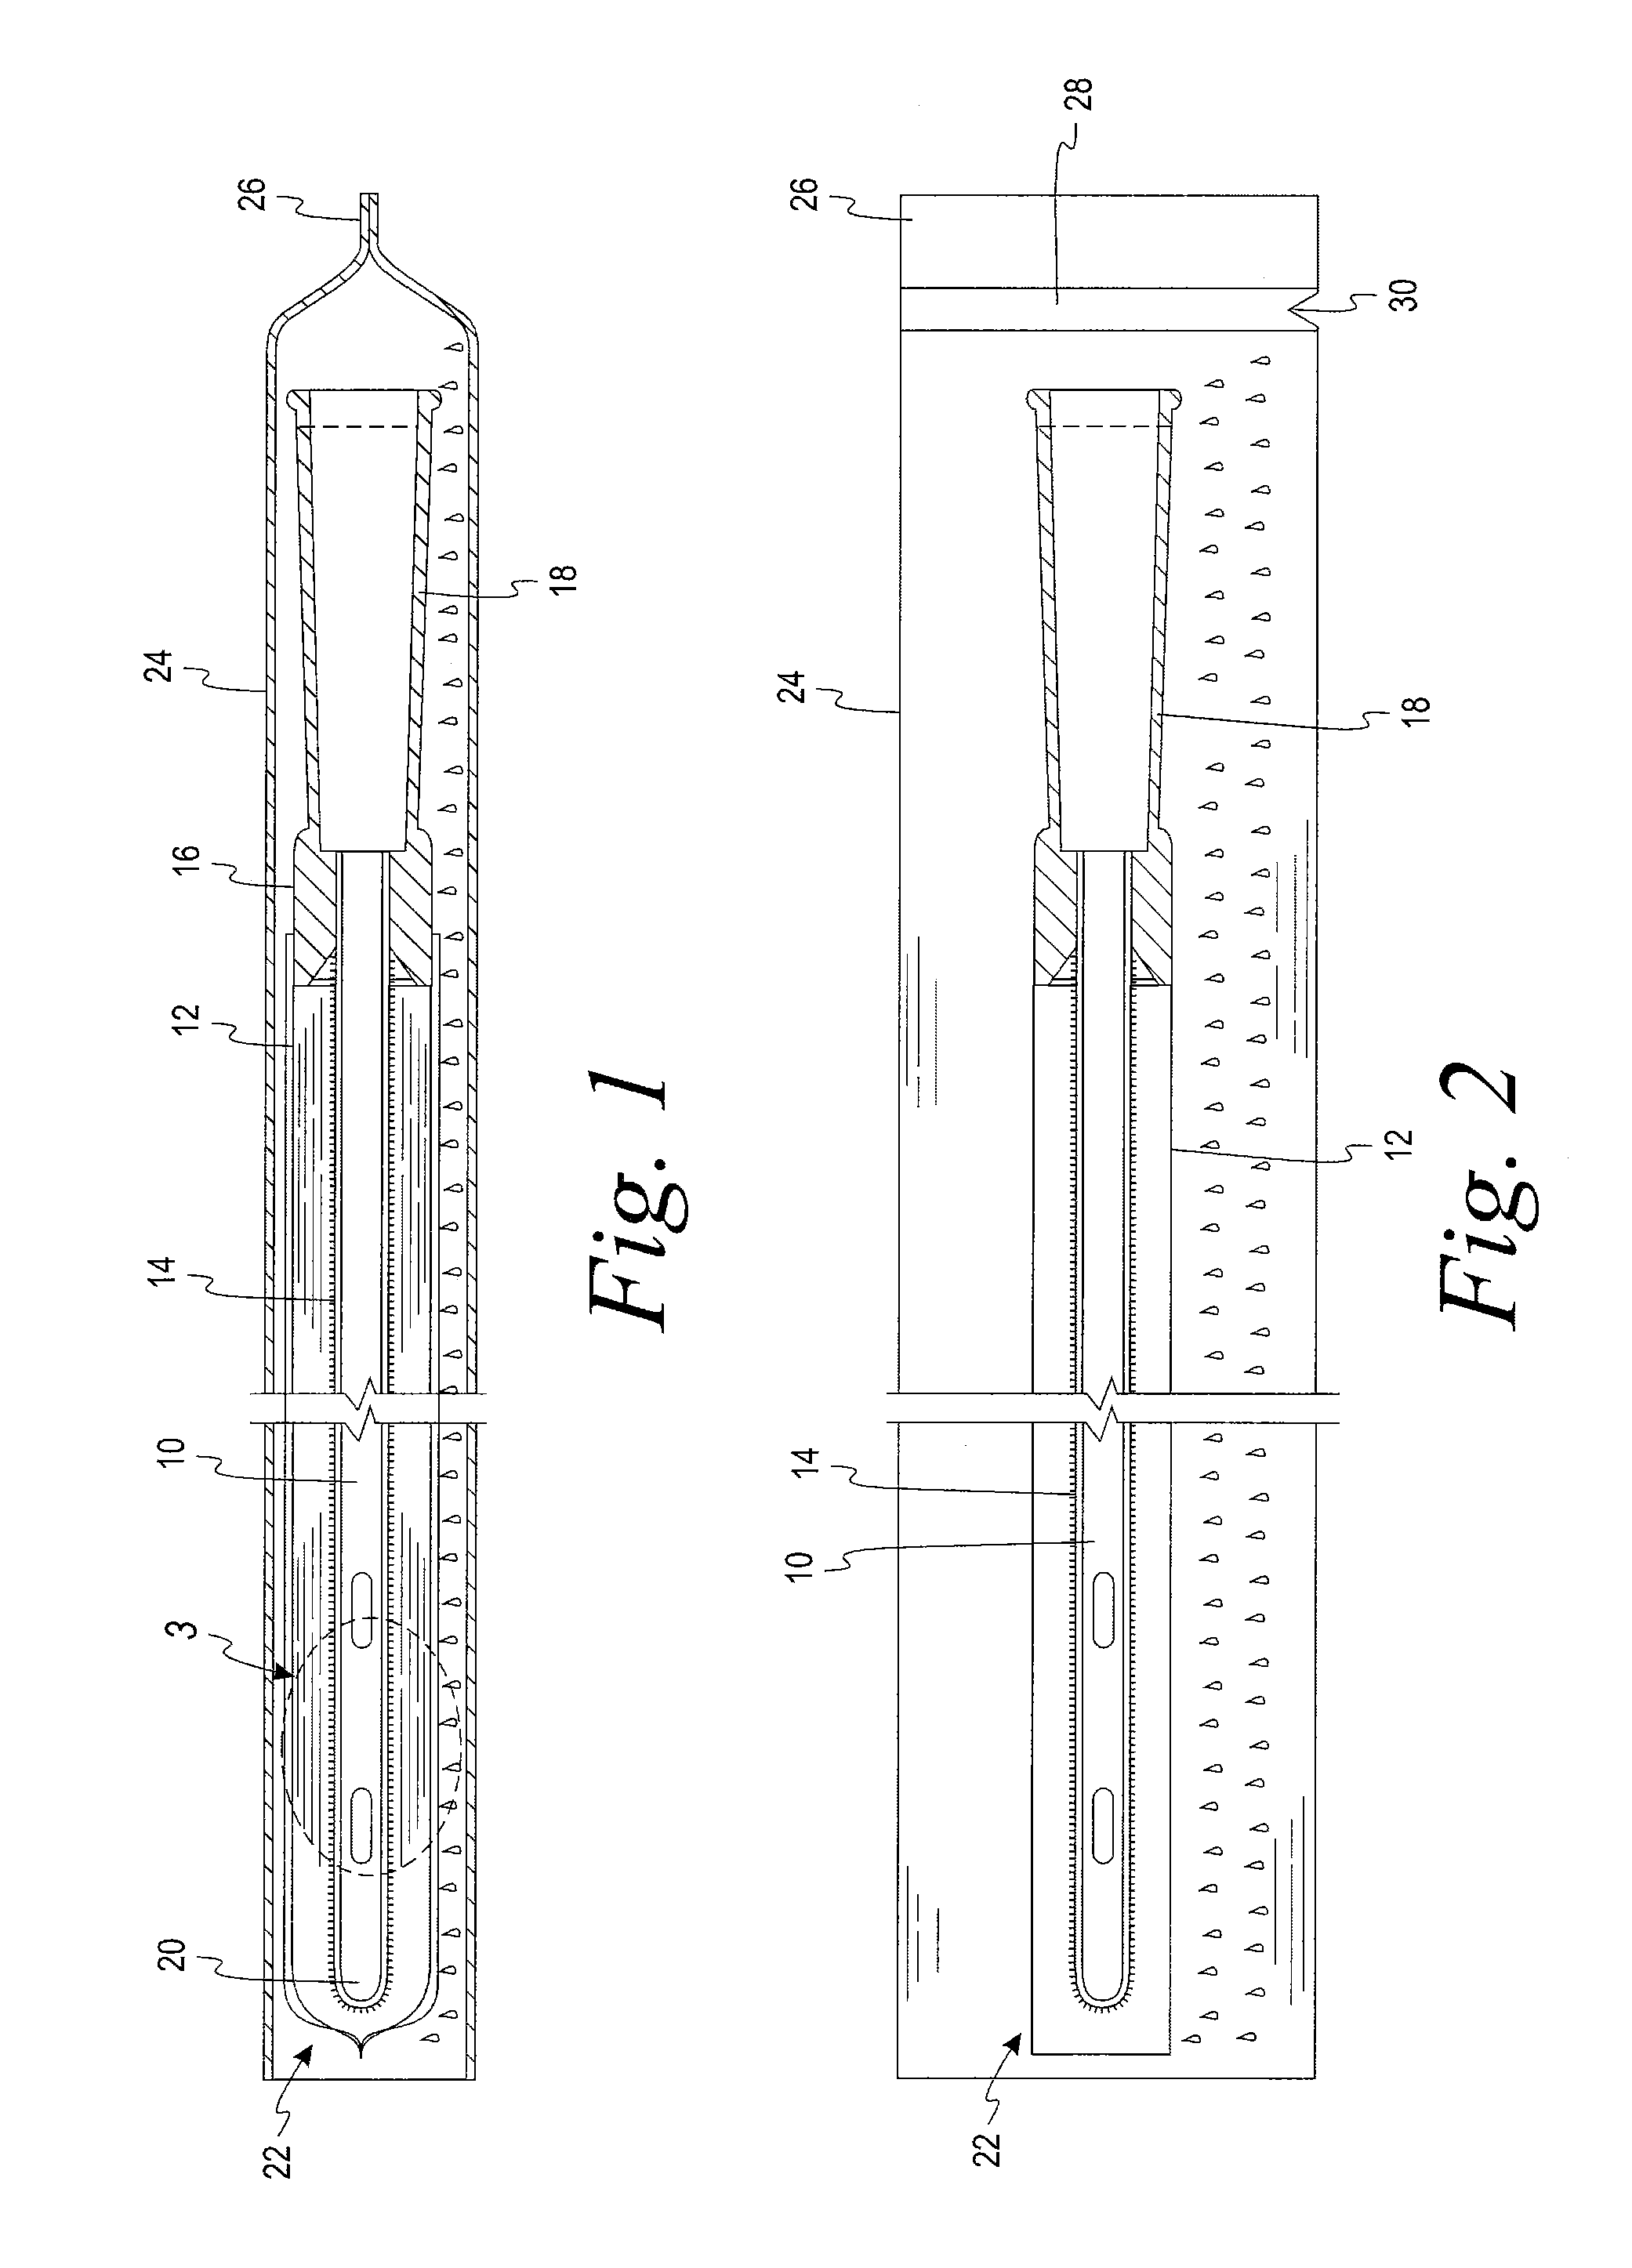 Vapor hydrated medical device with low surface energy sleeve